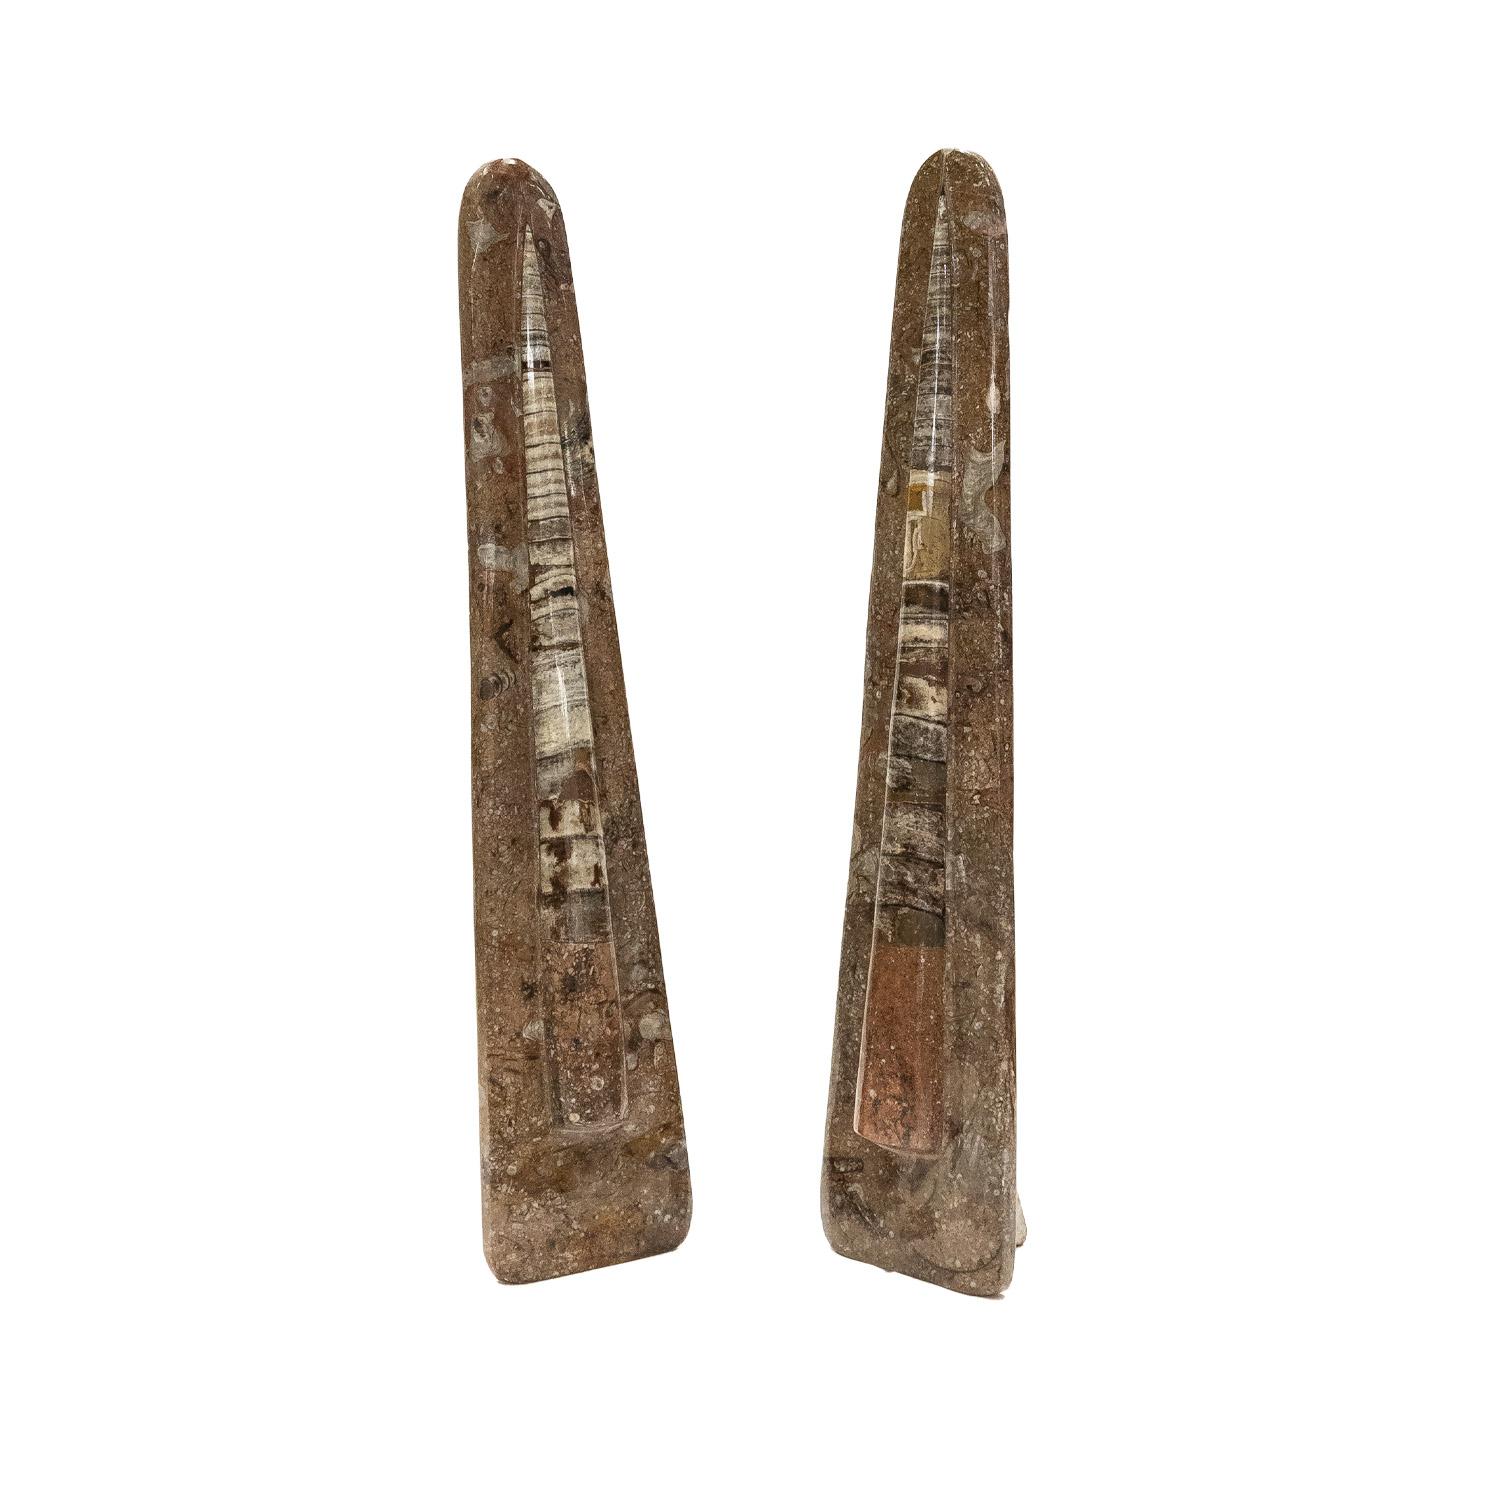 Prehistoric Exceptional Pair of Obelisk Shaped Fossil Sculptures 1980s For Sale